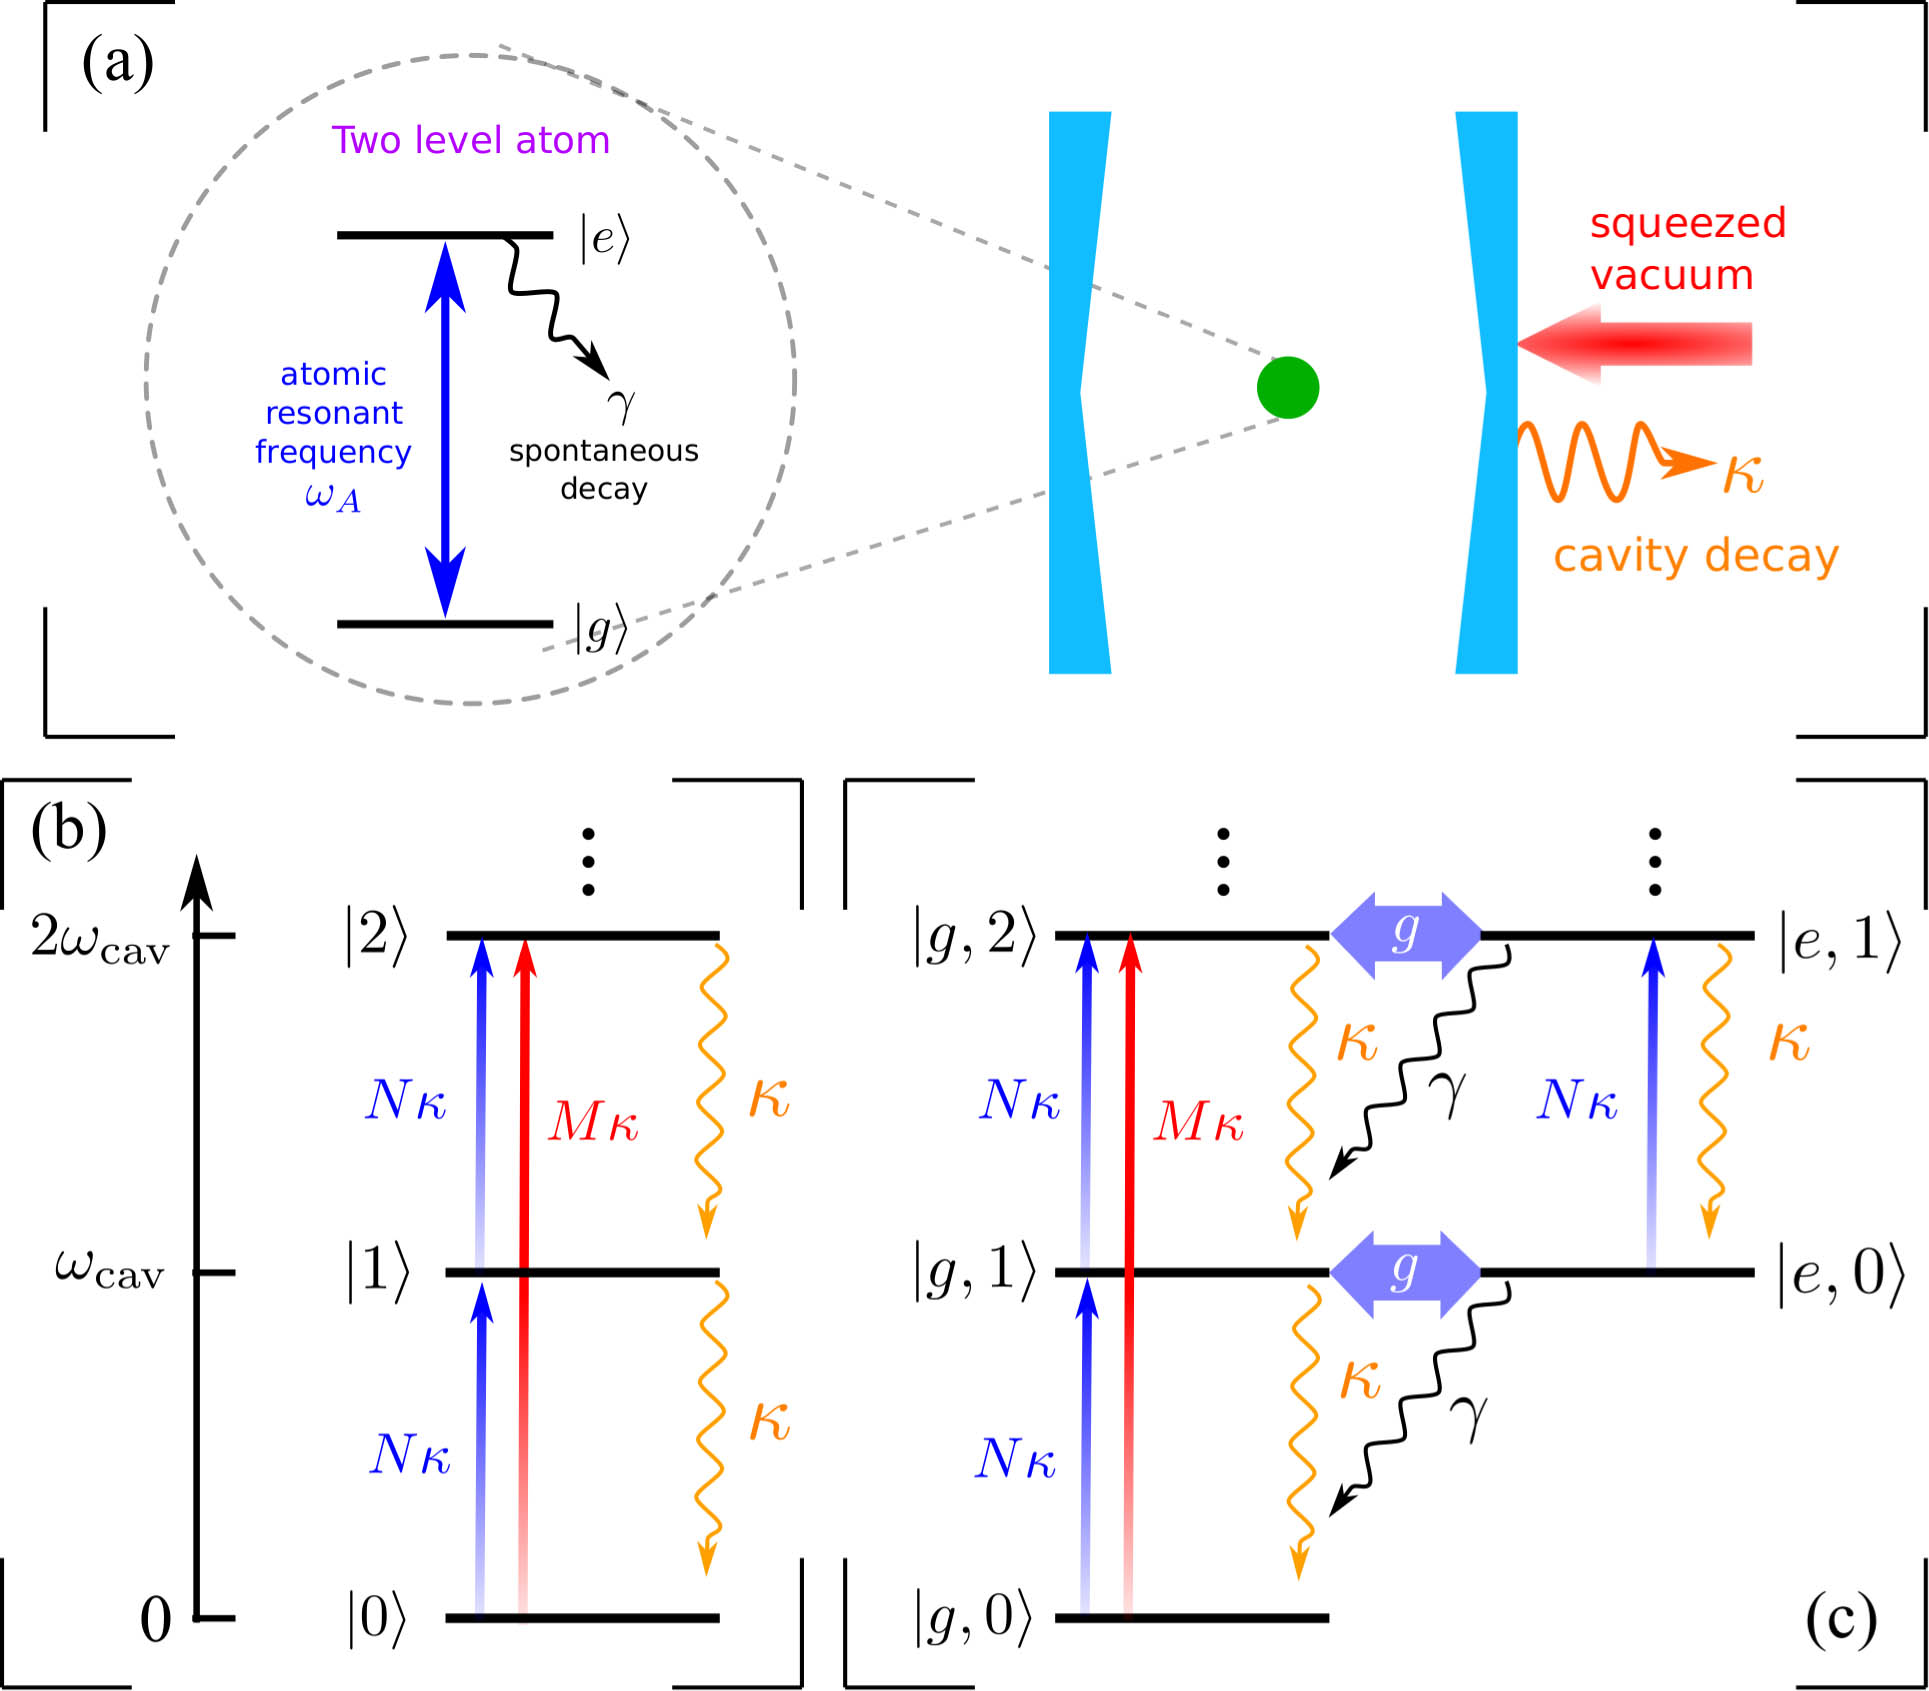 (a) Sketch of the single atom–cavity QED system driven by a broadband squeezed vacuum with central frequency ωsq. The resonance frequency of this two-level atom ωA=ωe−ωg with ℏωα (α=e,g) being the energy of state |α〉. Here, g is the coupling constant between the atom and cavity. γ and κ are the decay rates of the atom and cavity, respectively. Panels (b) and (c) demonstrate the energy levels and the corresponding transition pathways for the empty cavity and the atom–cavity QED system, respectively.